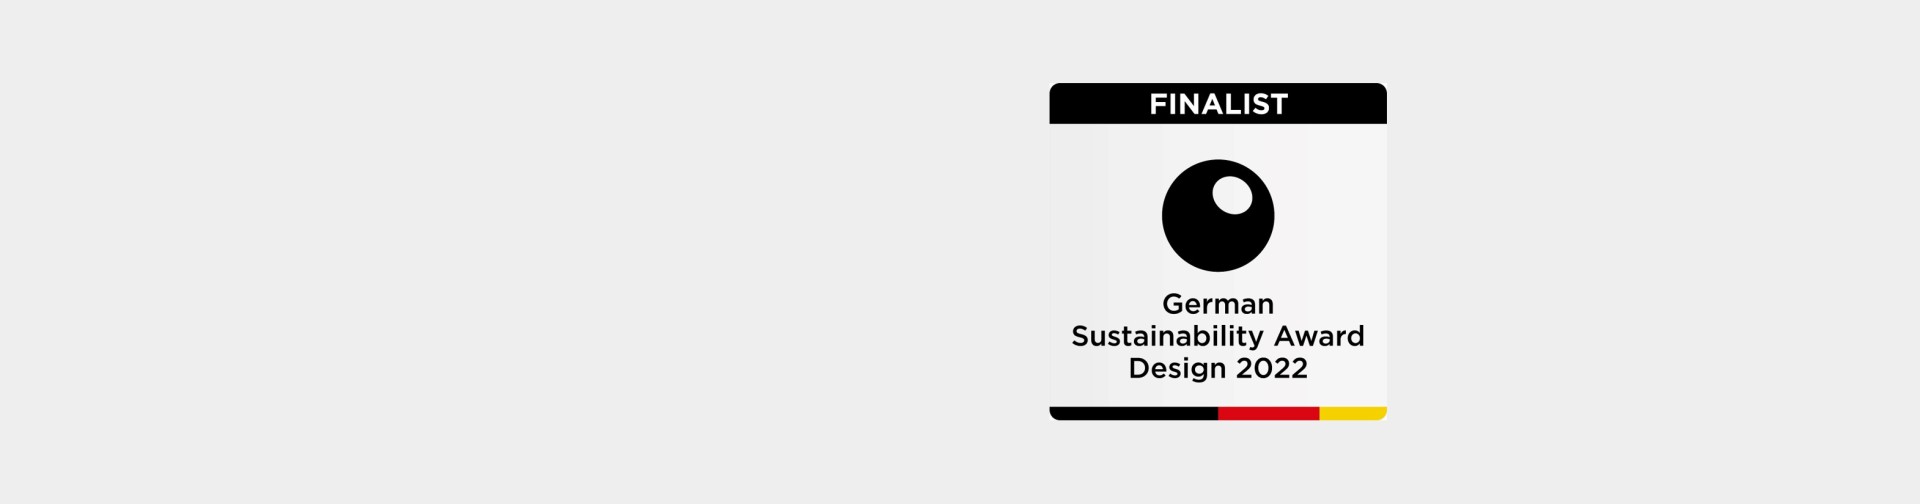 TUNAP is a finalist for the German Sustainability Award Design